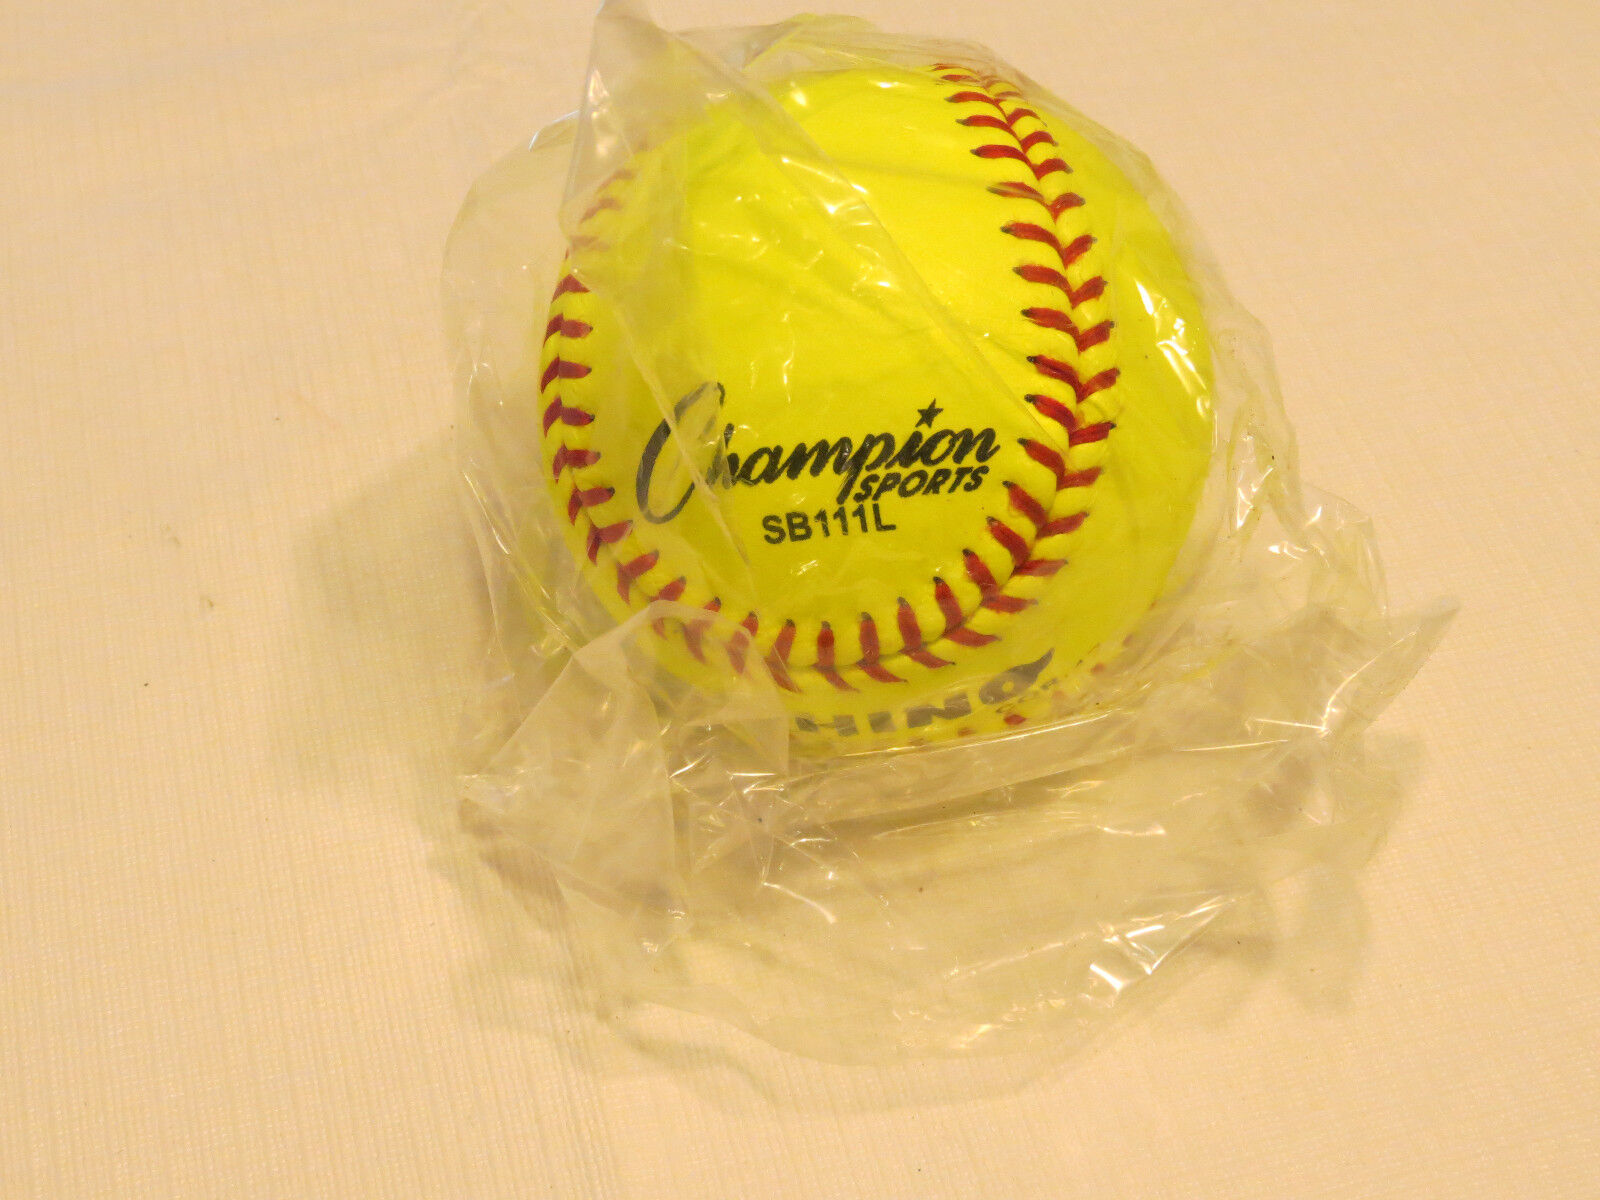 1 softball Champion Sports SB111L NFHSA Cork Core 11 in Yellow official NOS NWT - $15.43